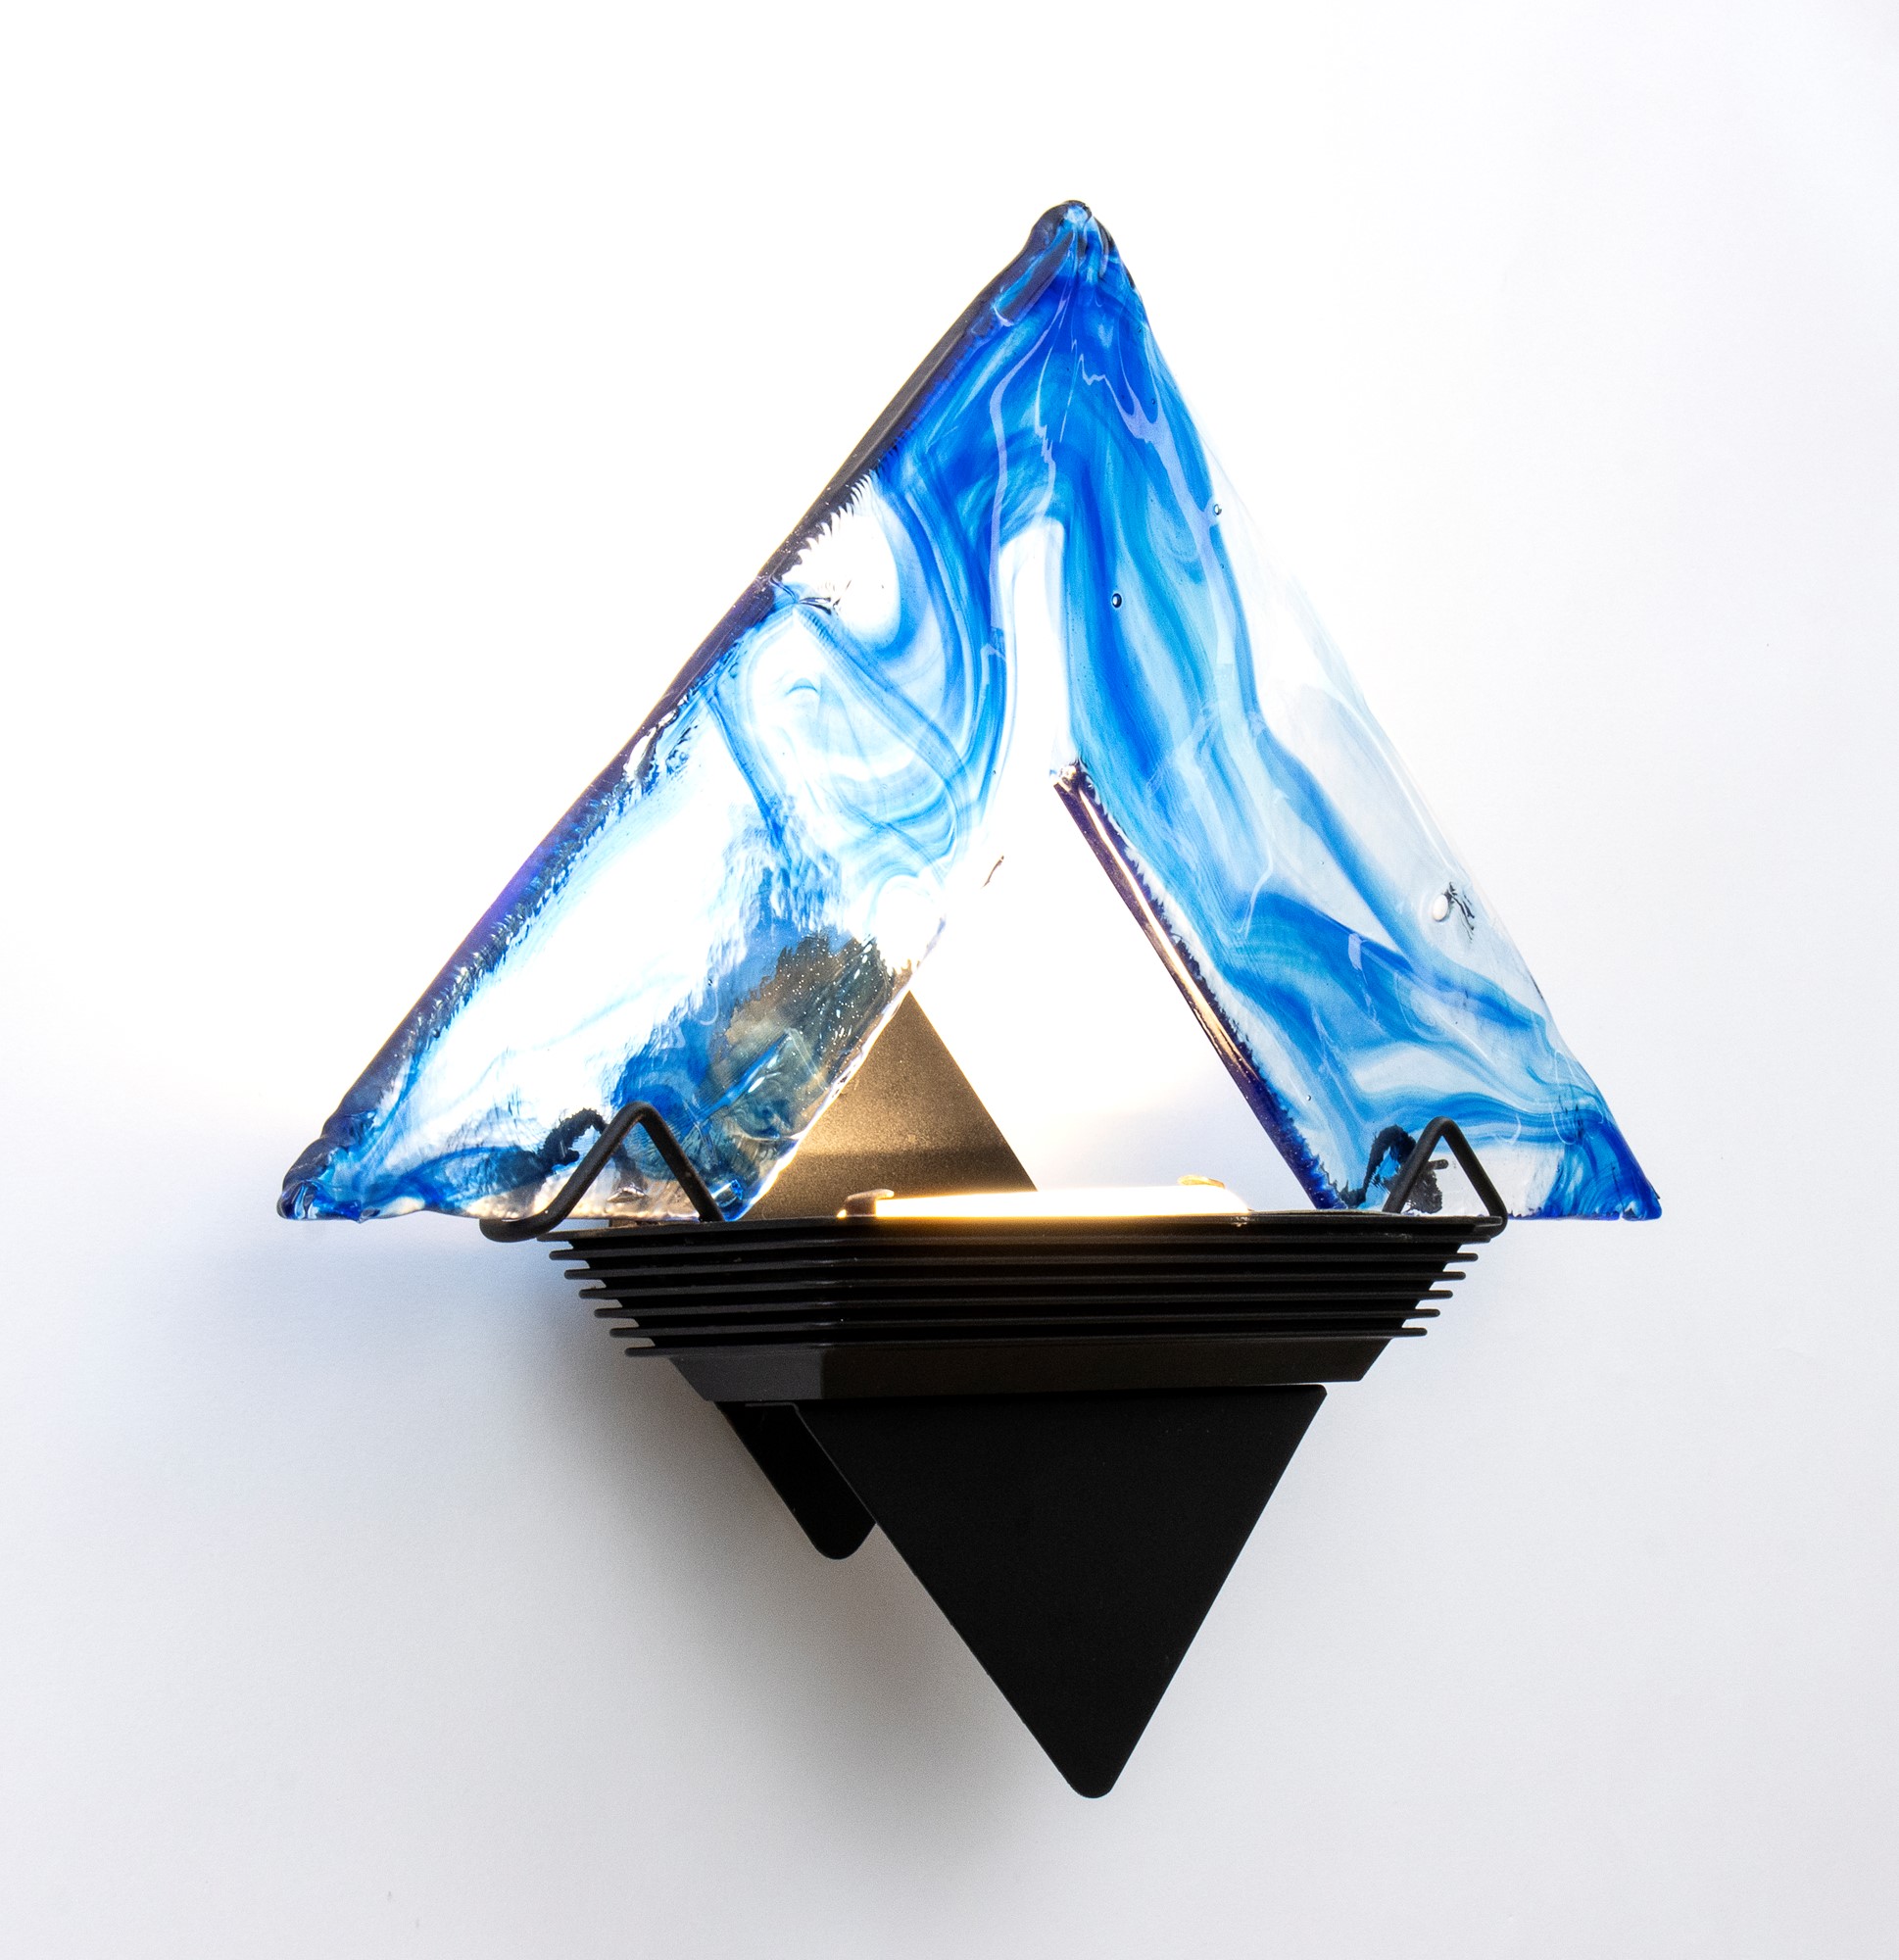 La Murrina wing lamp in hand blown Murano glass mounted on a triangular frame - Image 9 of 27